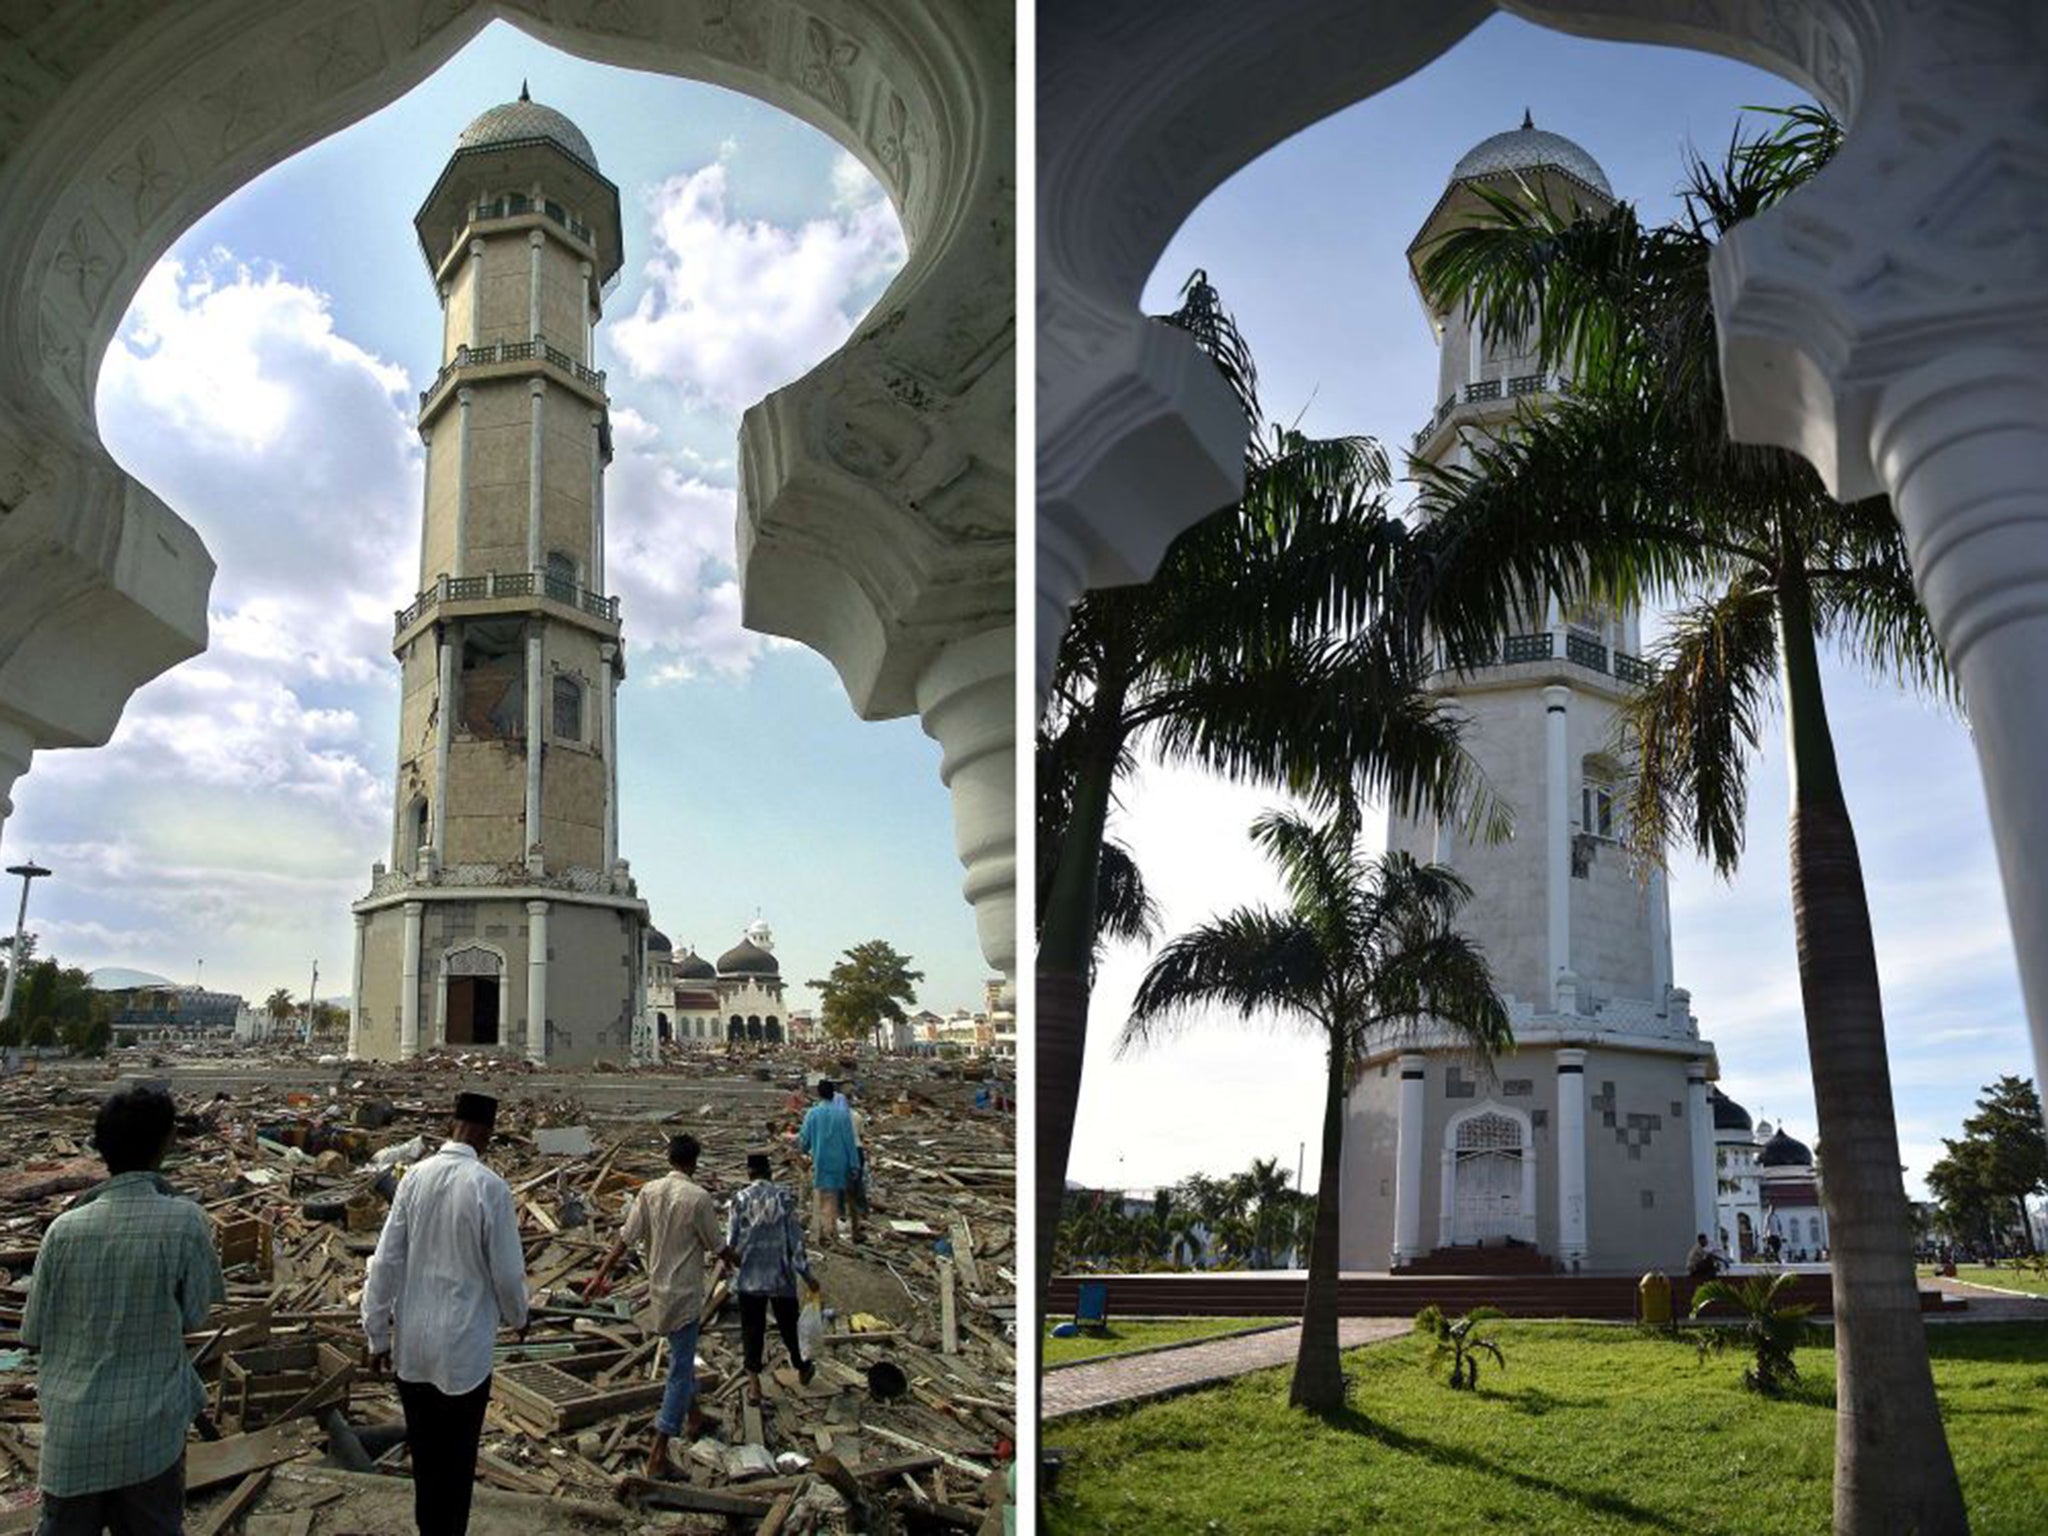 Debris scattered across the grounds of Banda Aceh's Baiturrahaman mosque on December 28, 2004, compared with the same scene today